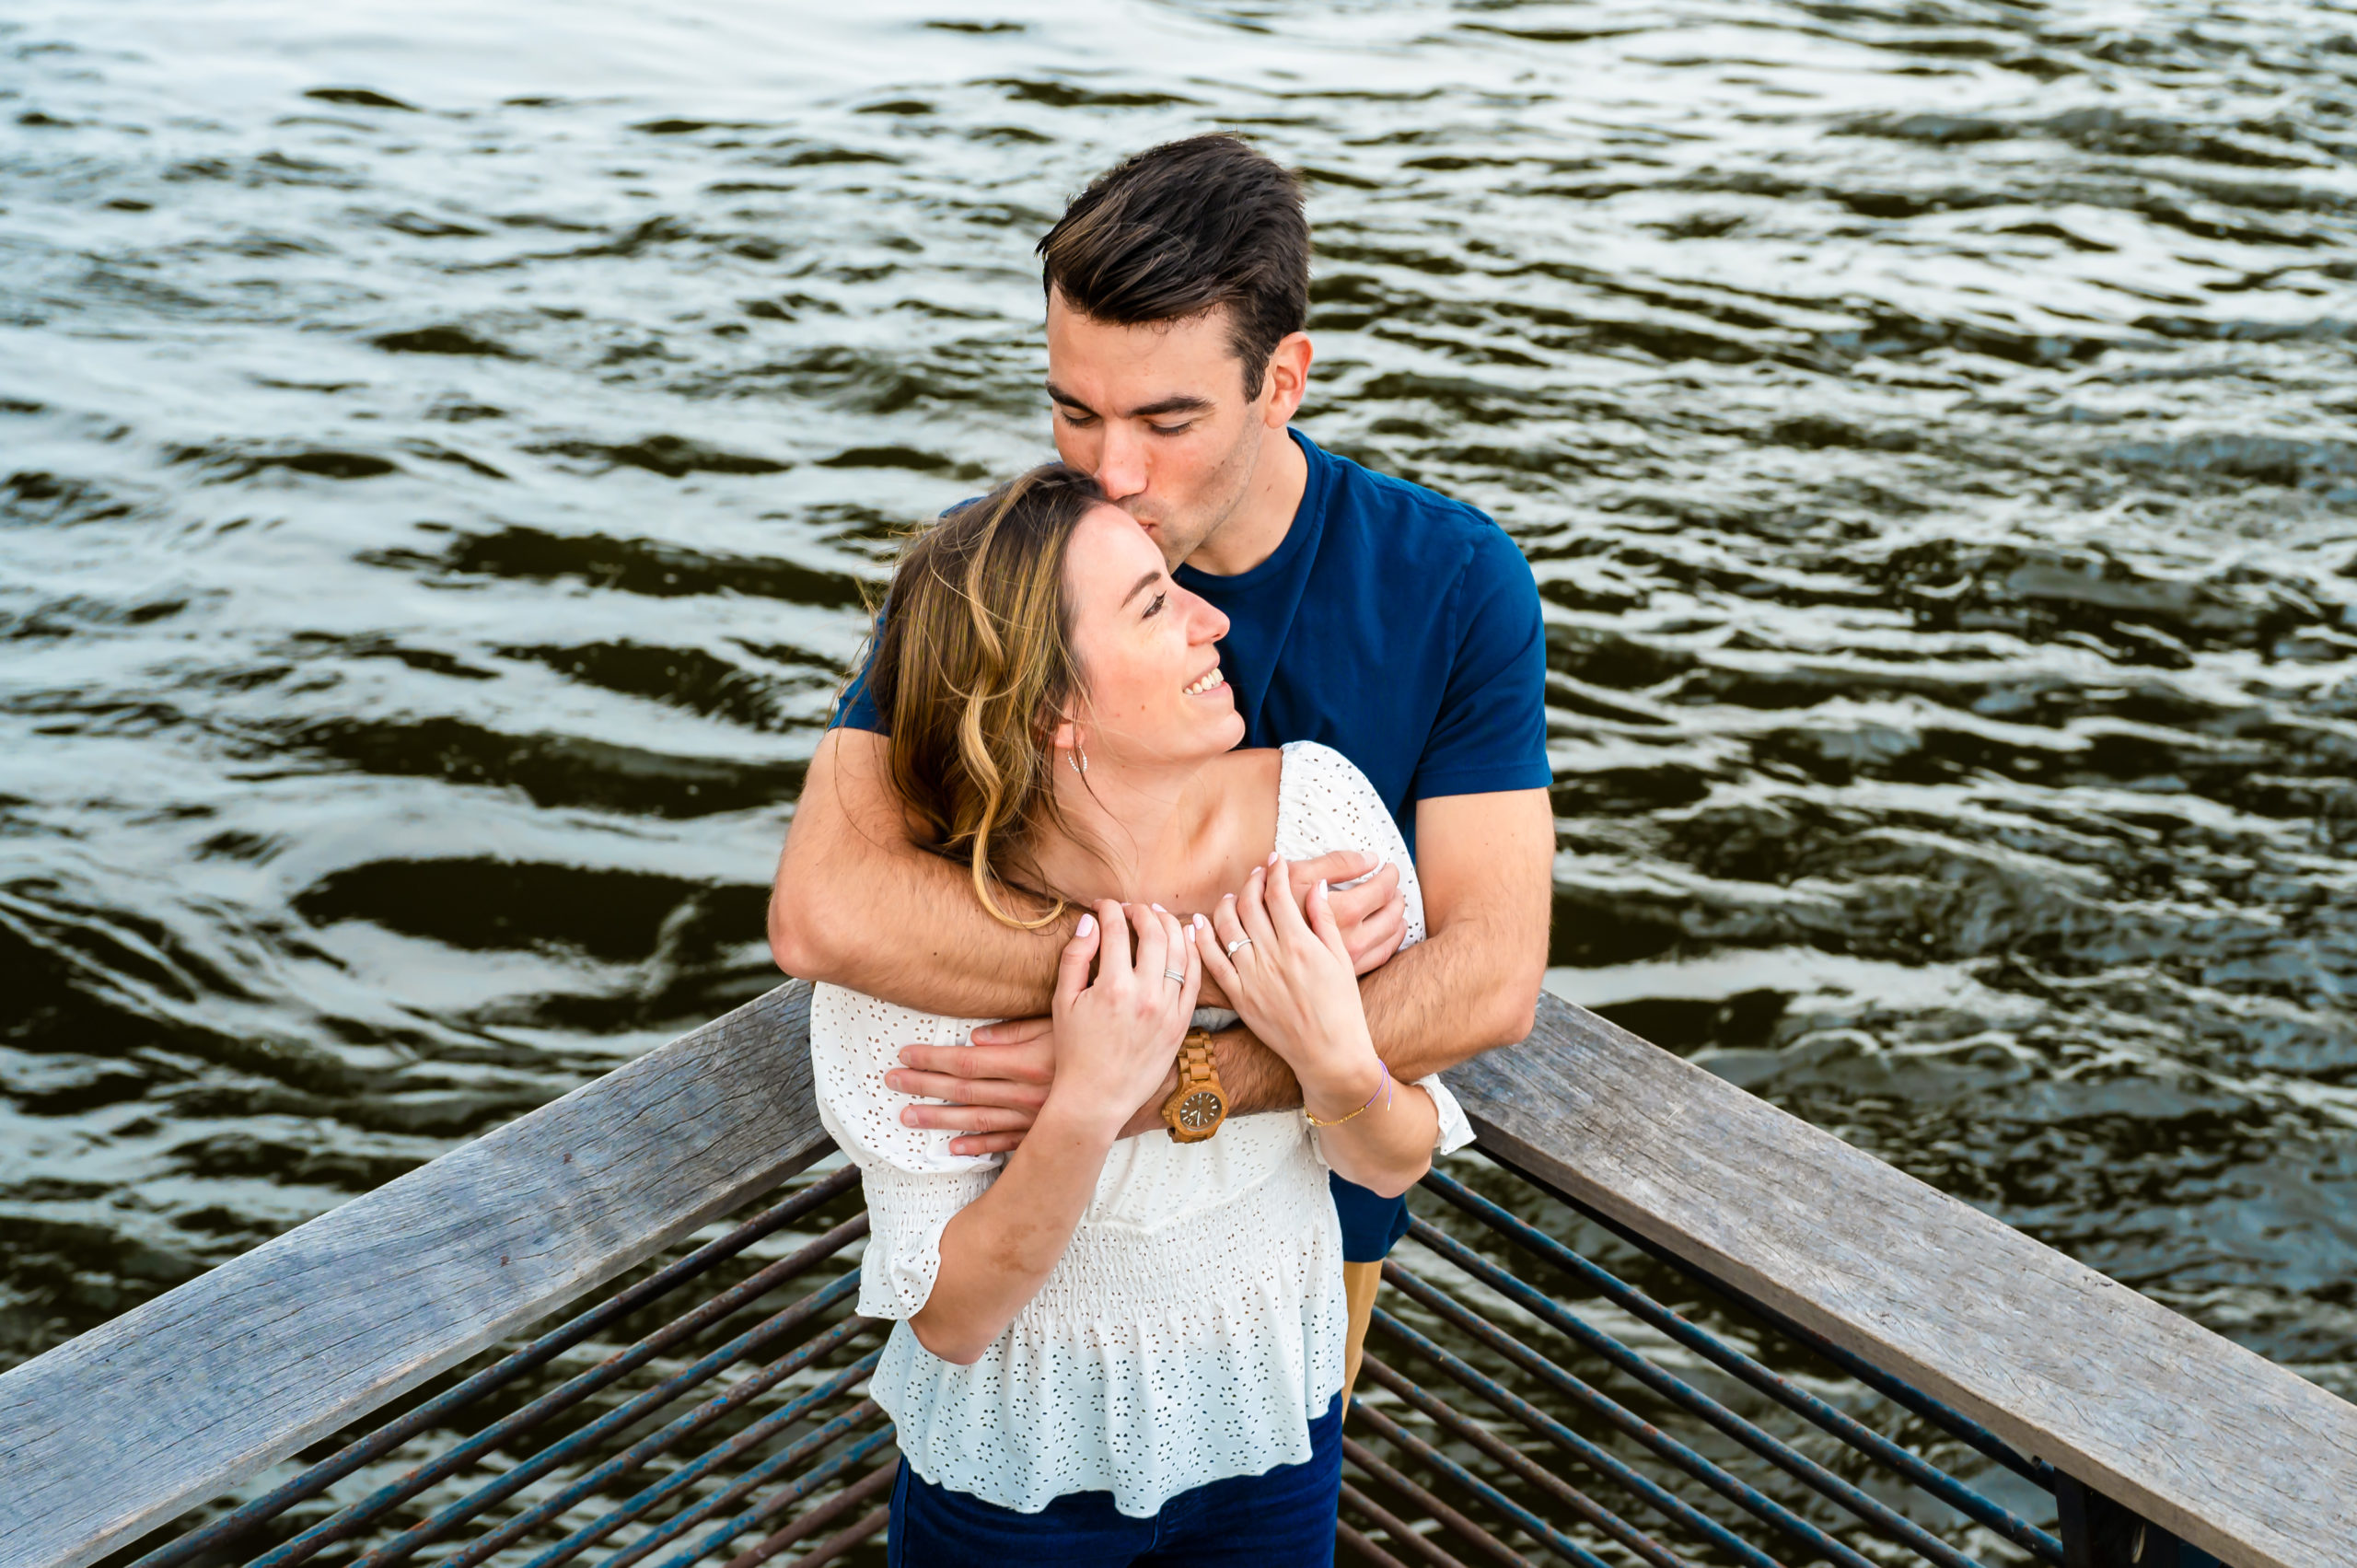 Race Street Pier Philadelphia engagement photo in front of the water